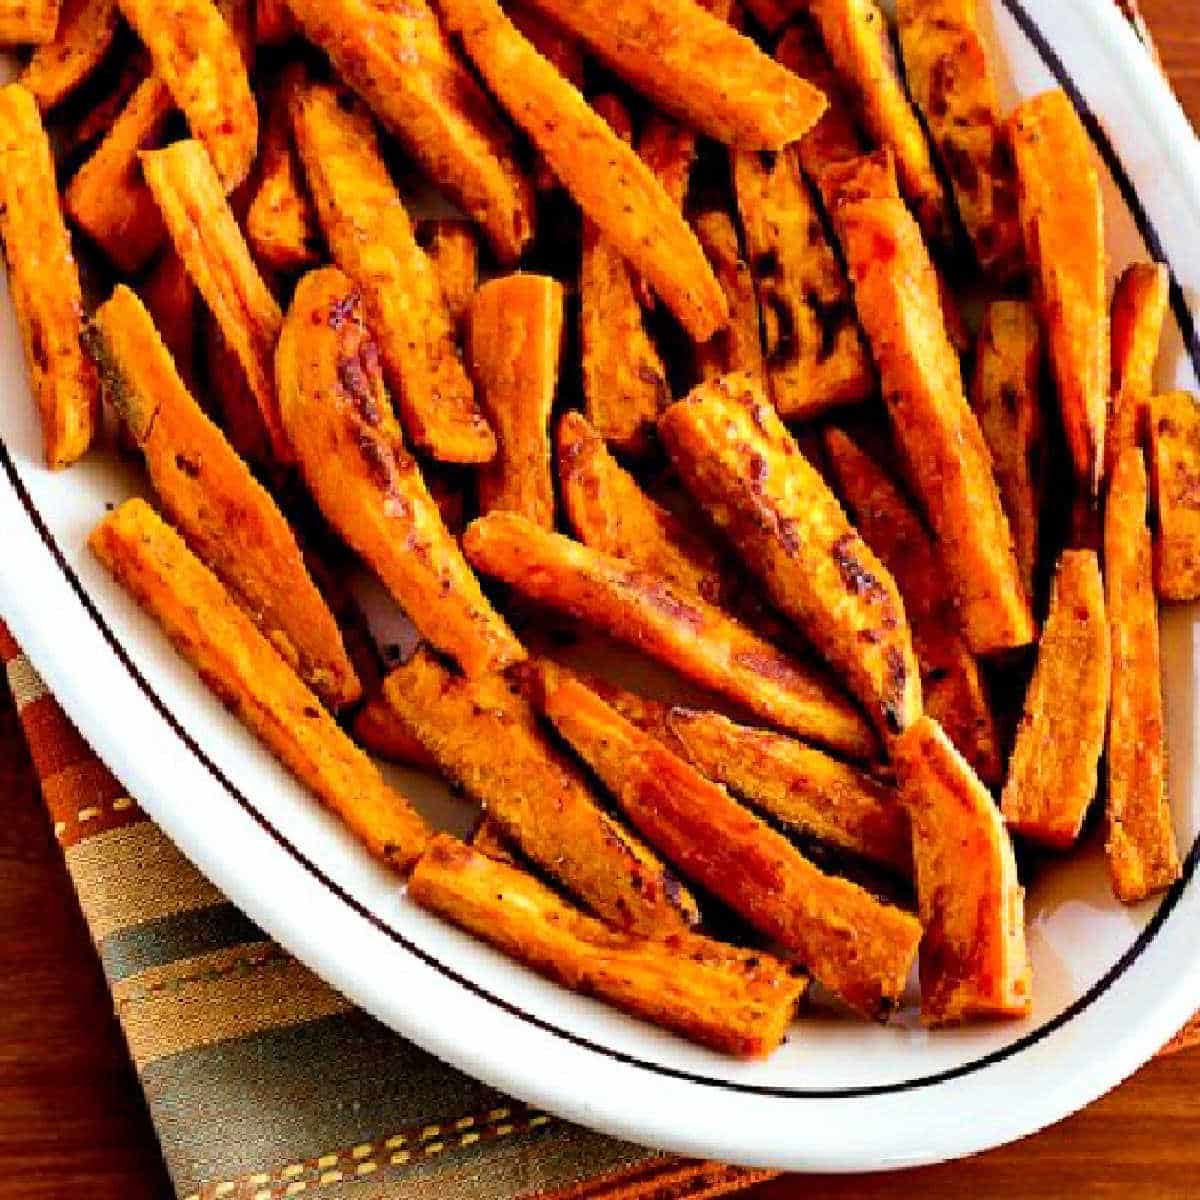 Square image for Spicy Baked Sweet Potato Fries shown on serving platter.